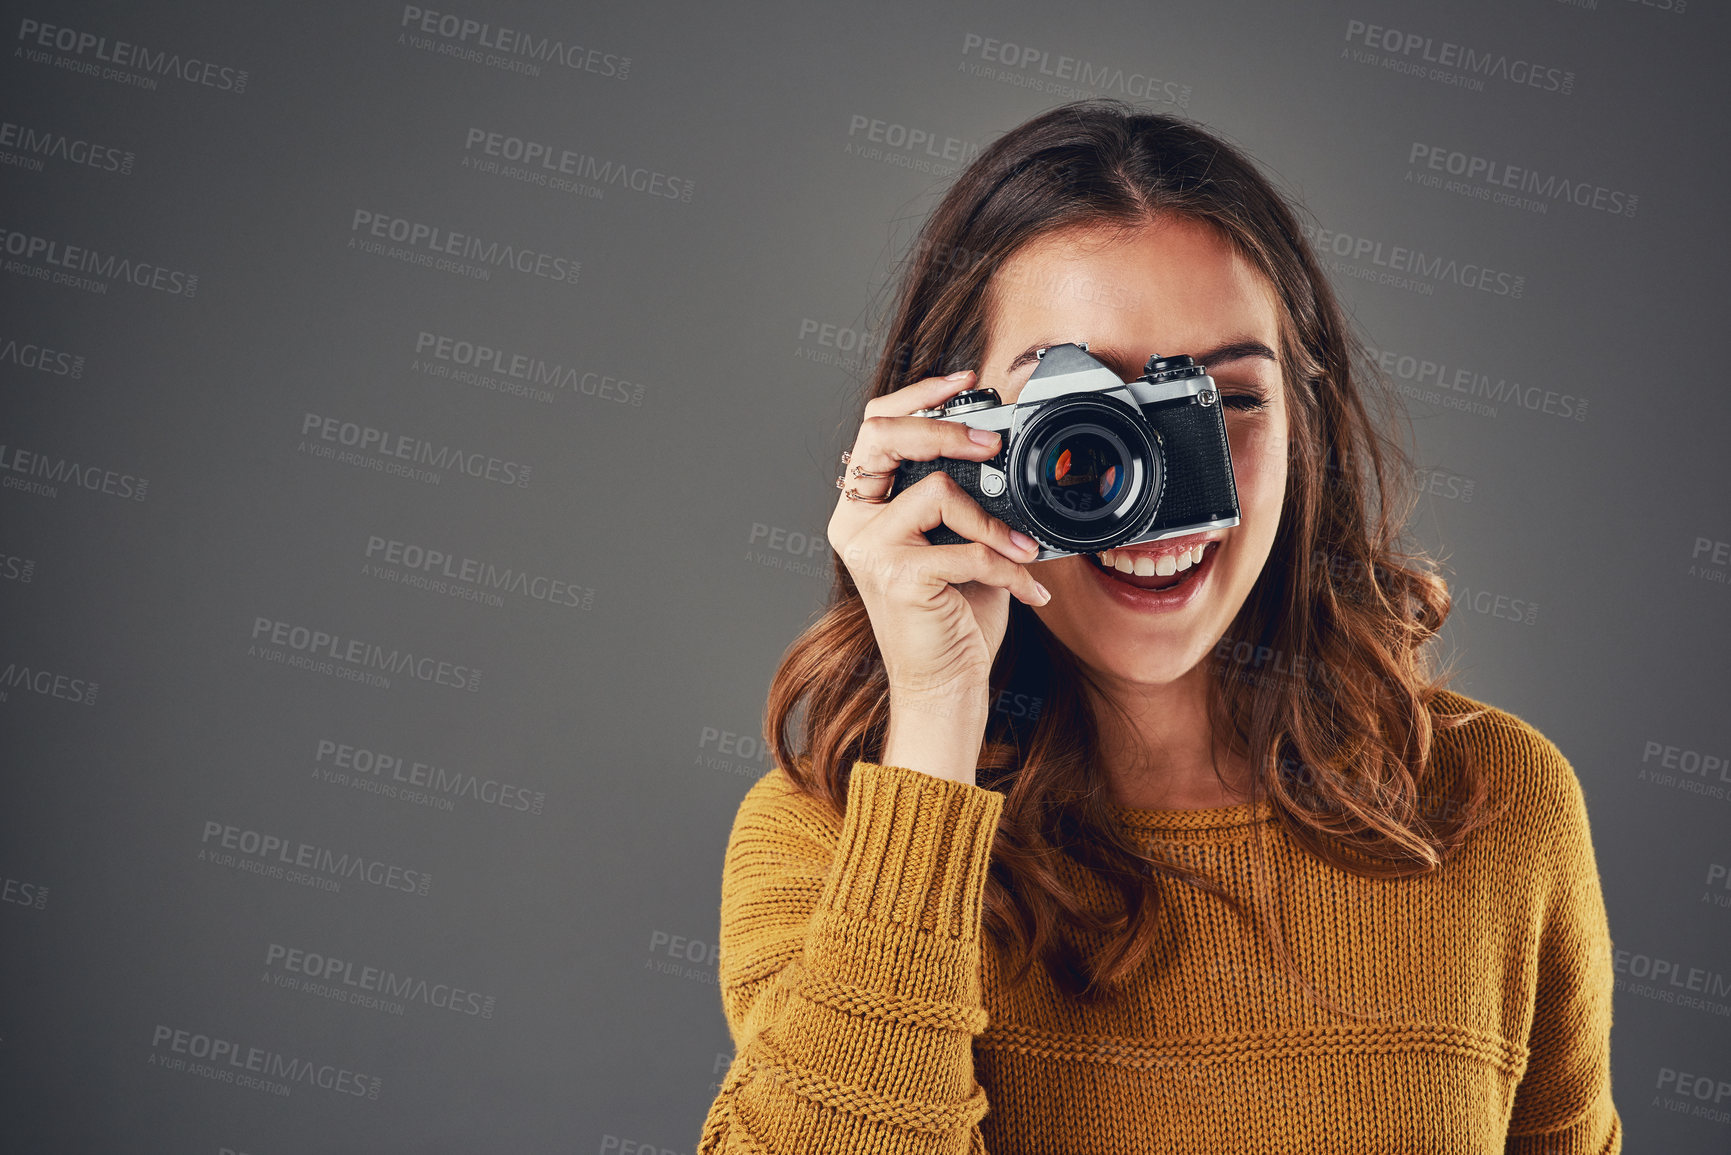 Buy stock photo Portrait of an attractive young woman taking photographs against a grey background